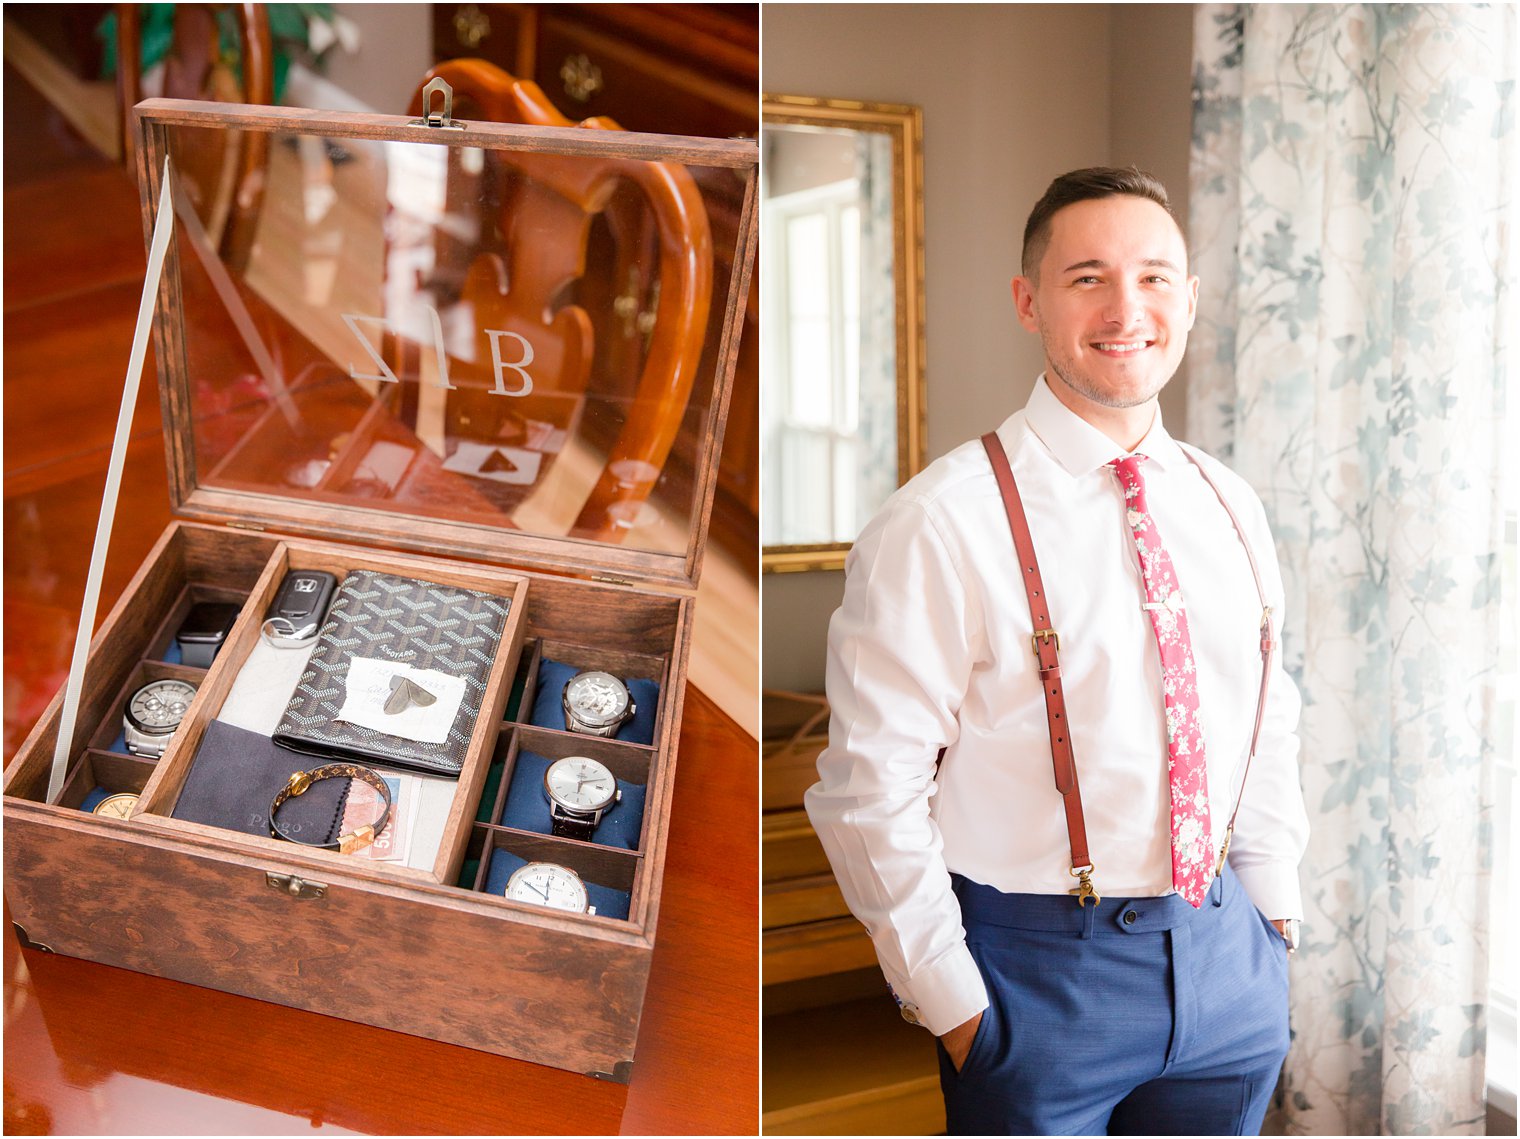 Groom's watch collection for his wedding day